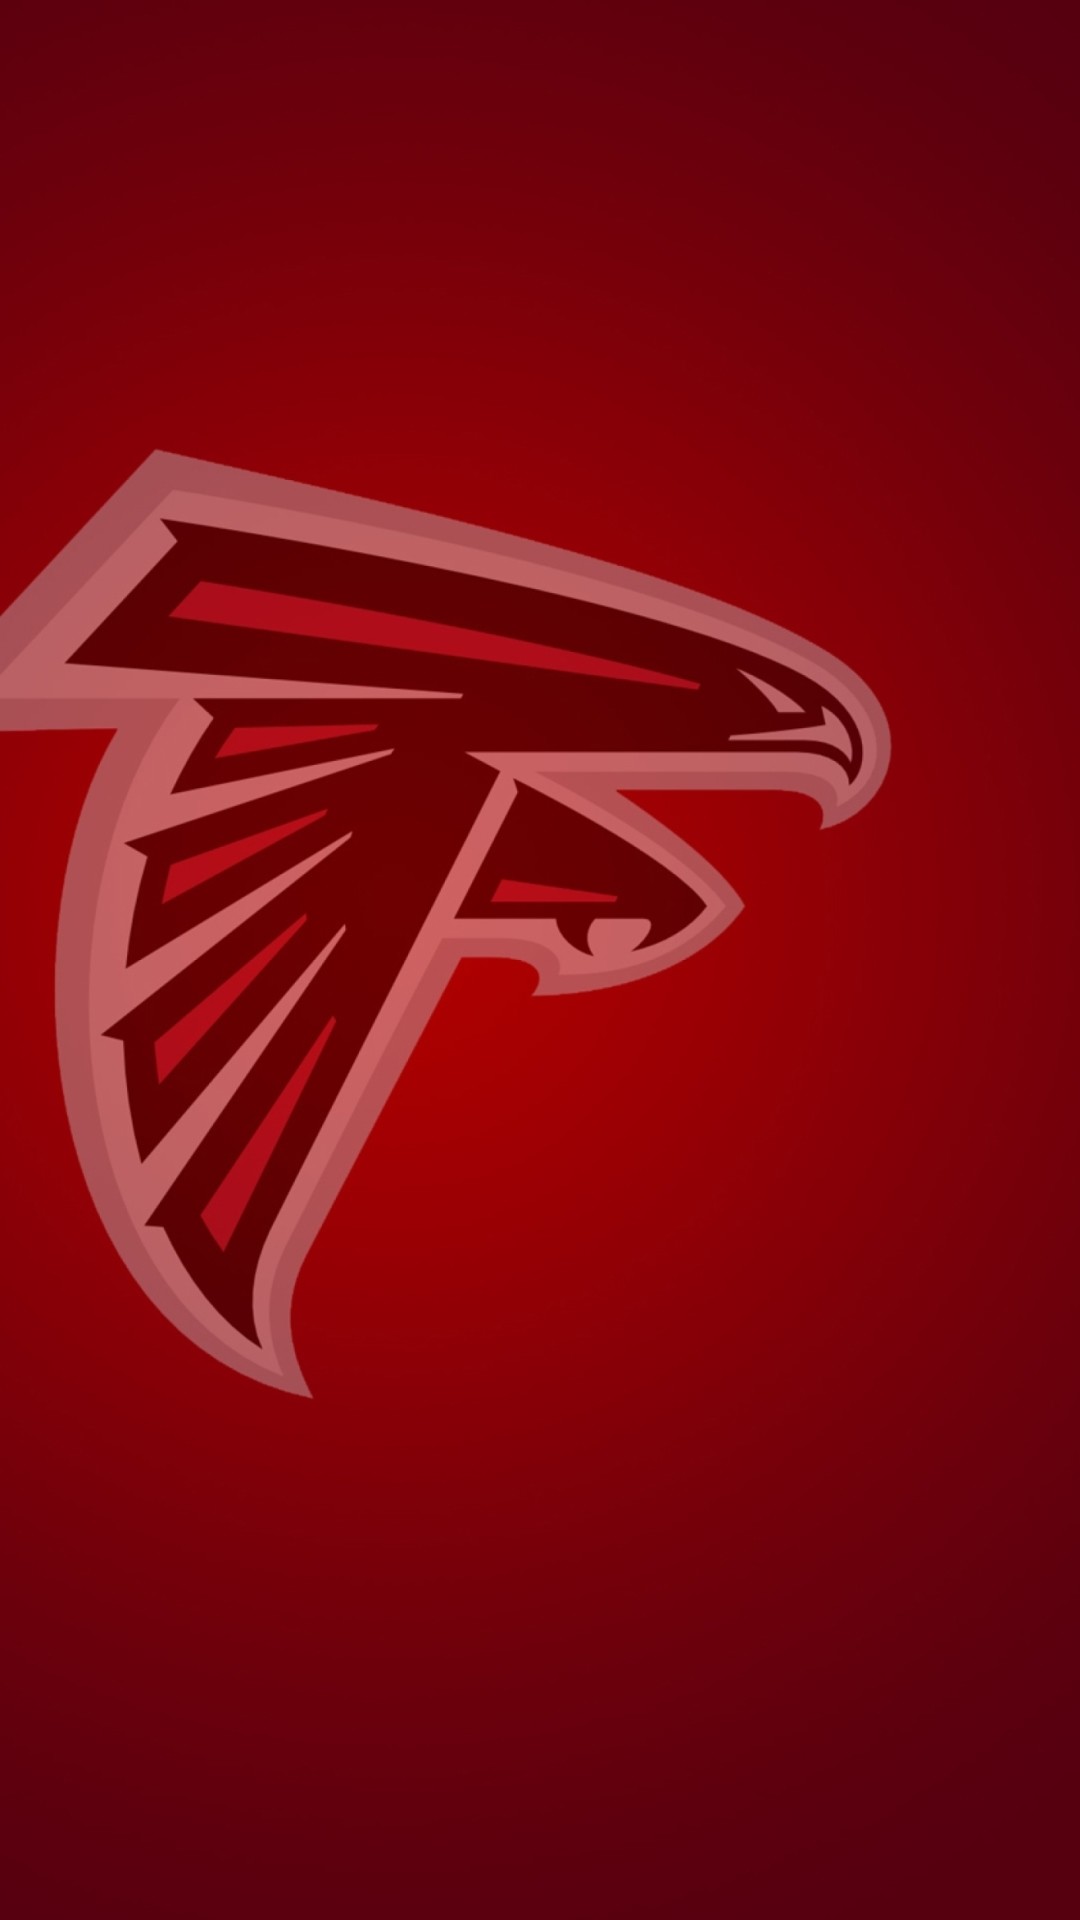 1080x1920 Title : wallpaper.wiki-atlanta-falcons-wallpaper-hd-for-android-pic.  Dimension : 1080 x 1920. File Type : JPG/JPEG